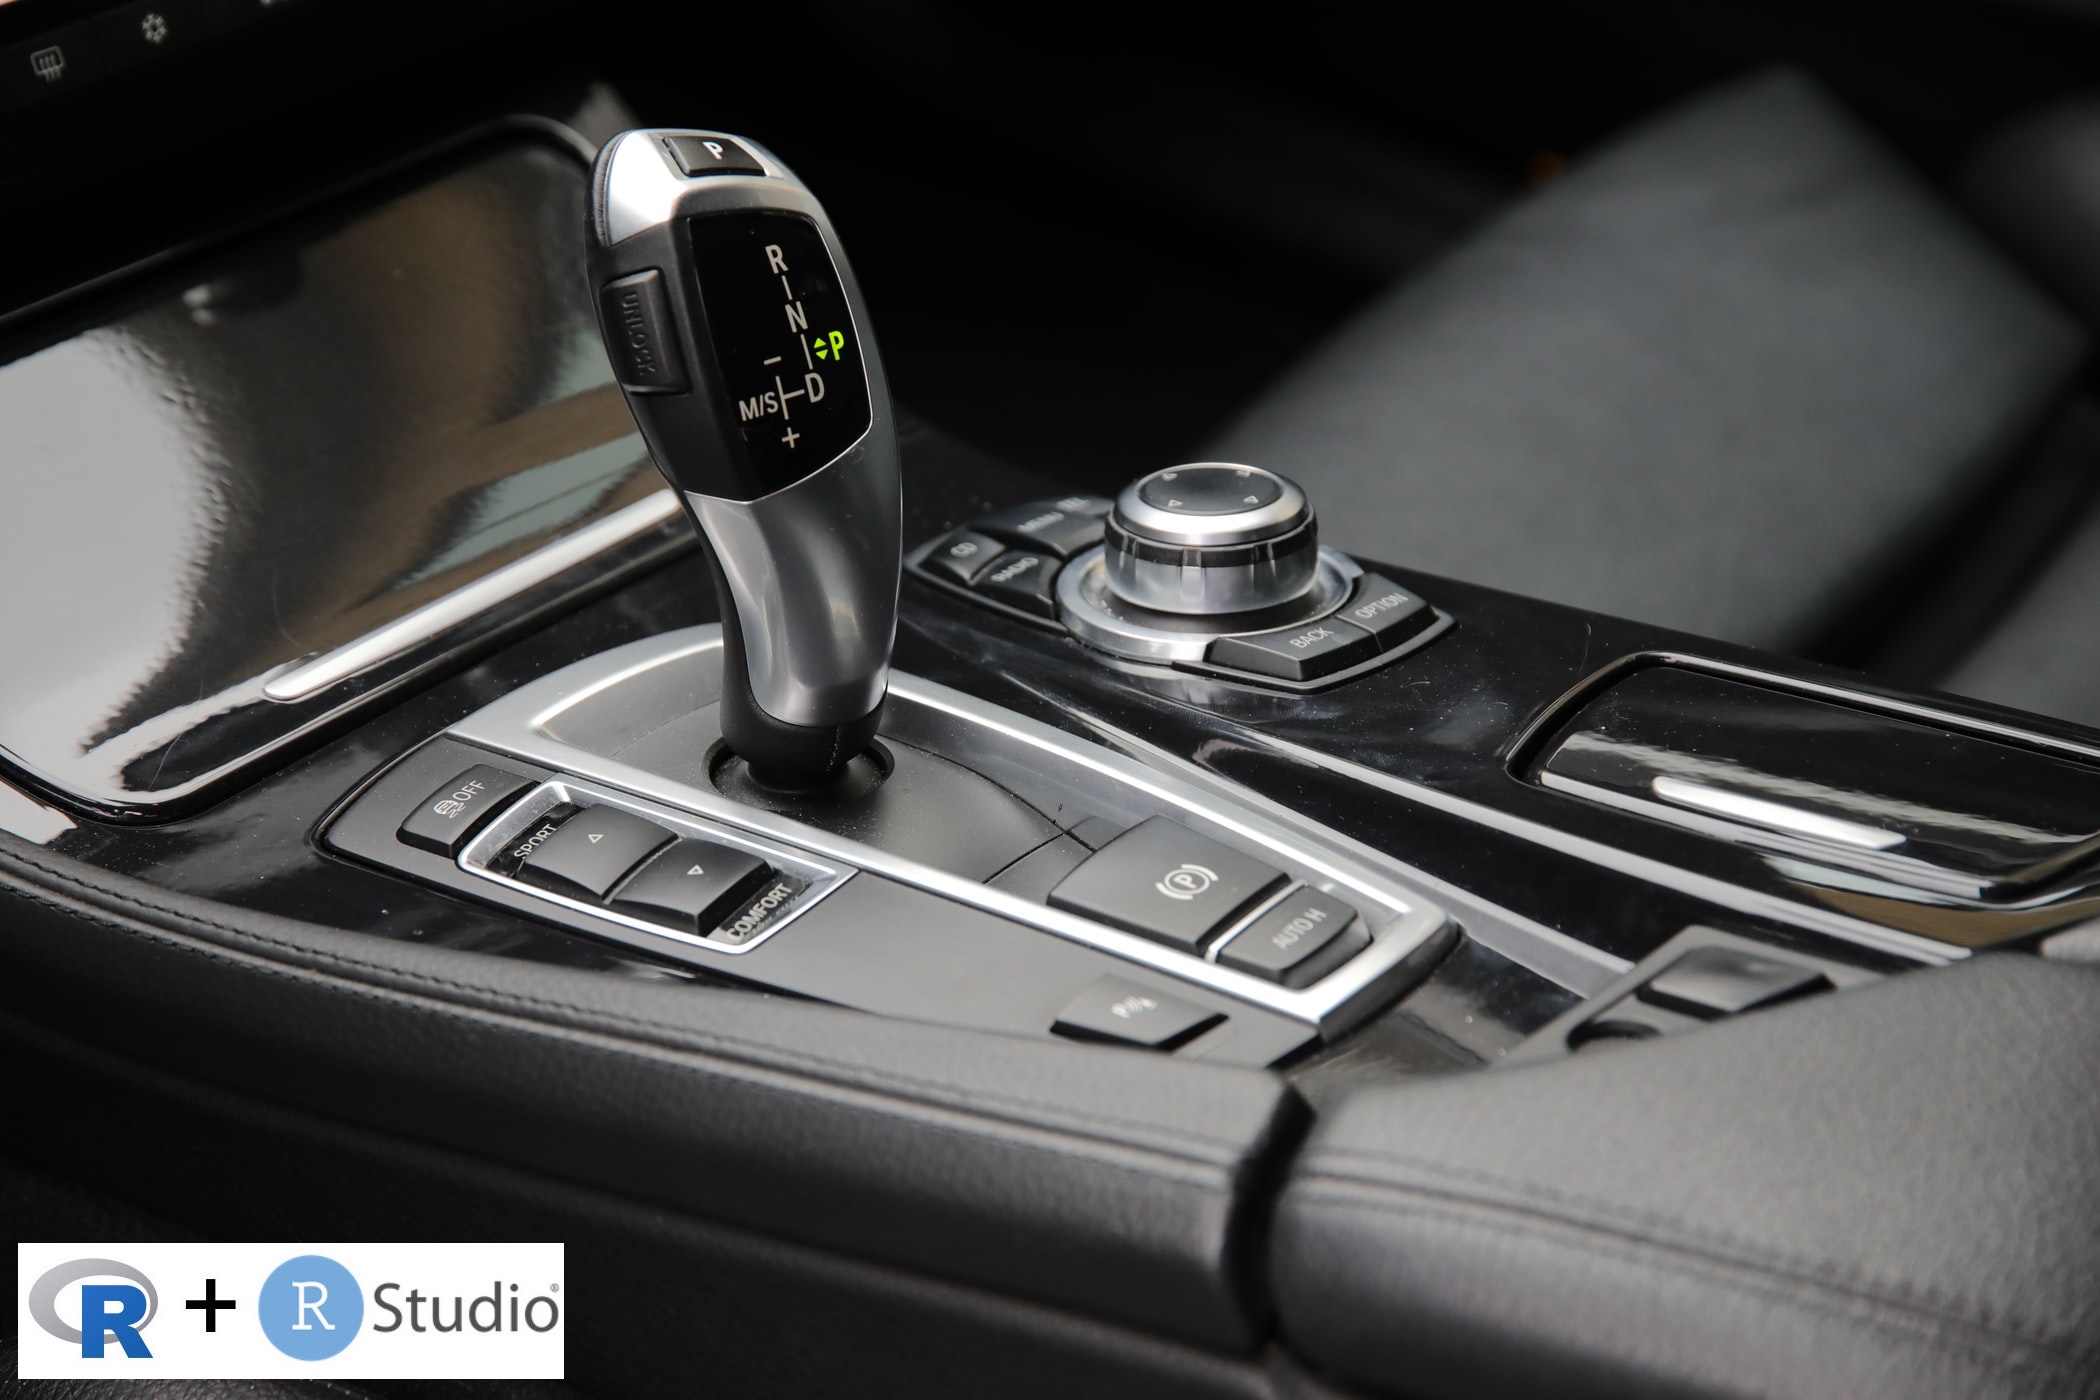 "automatic car gear shift representing the ease of RStudio"